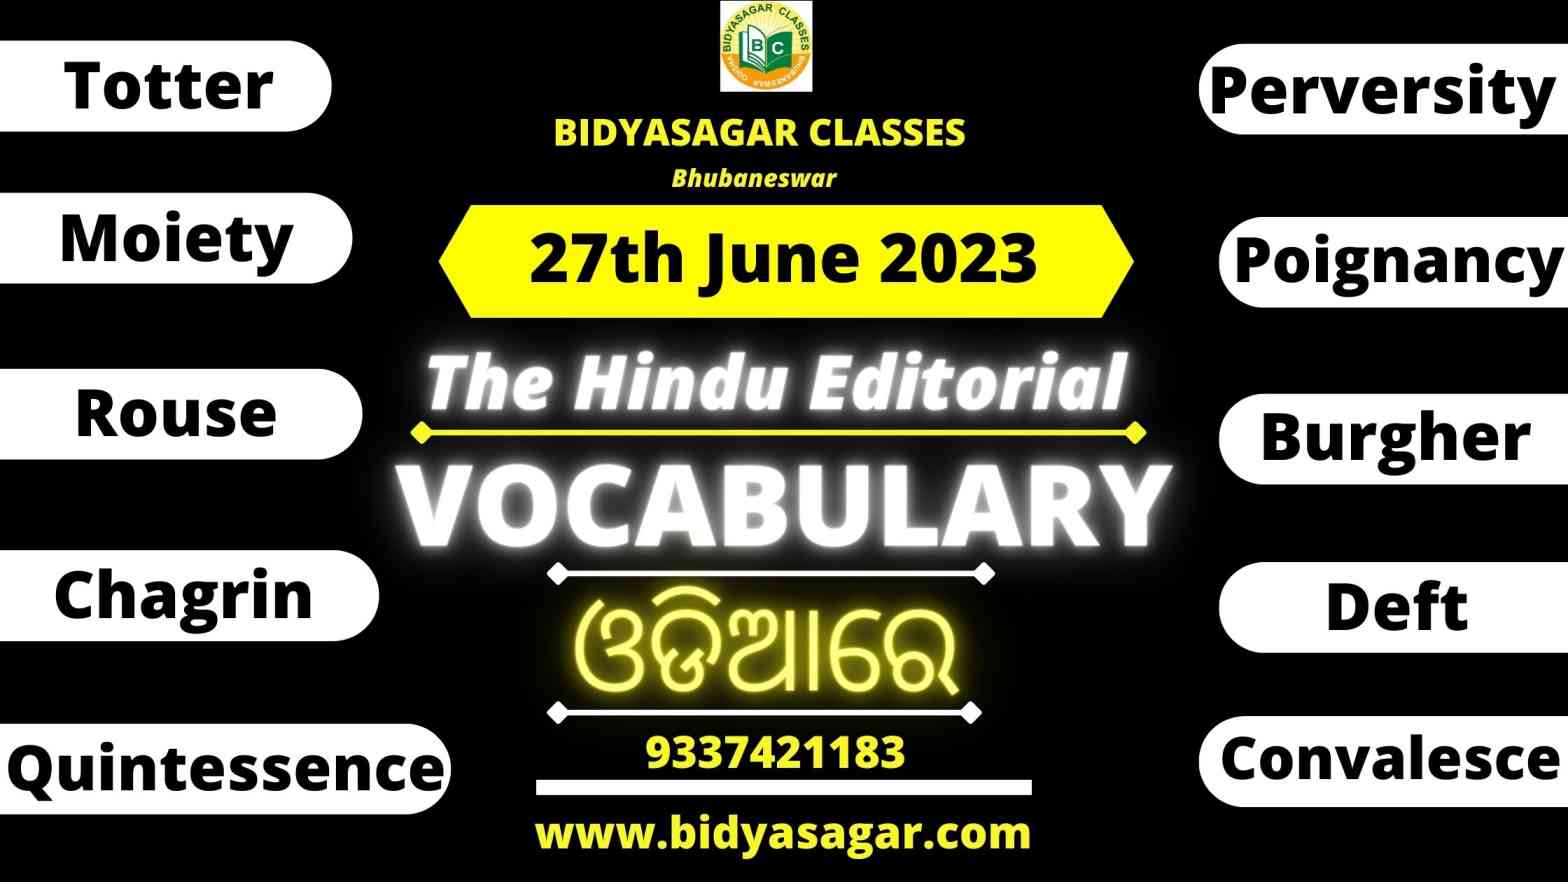 The Hindu Editorial Vocabulary of 27th June 2023